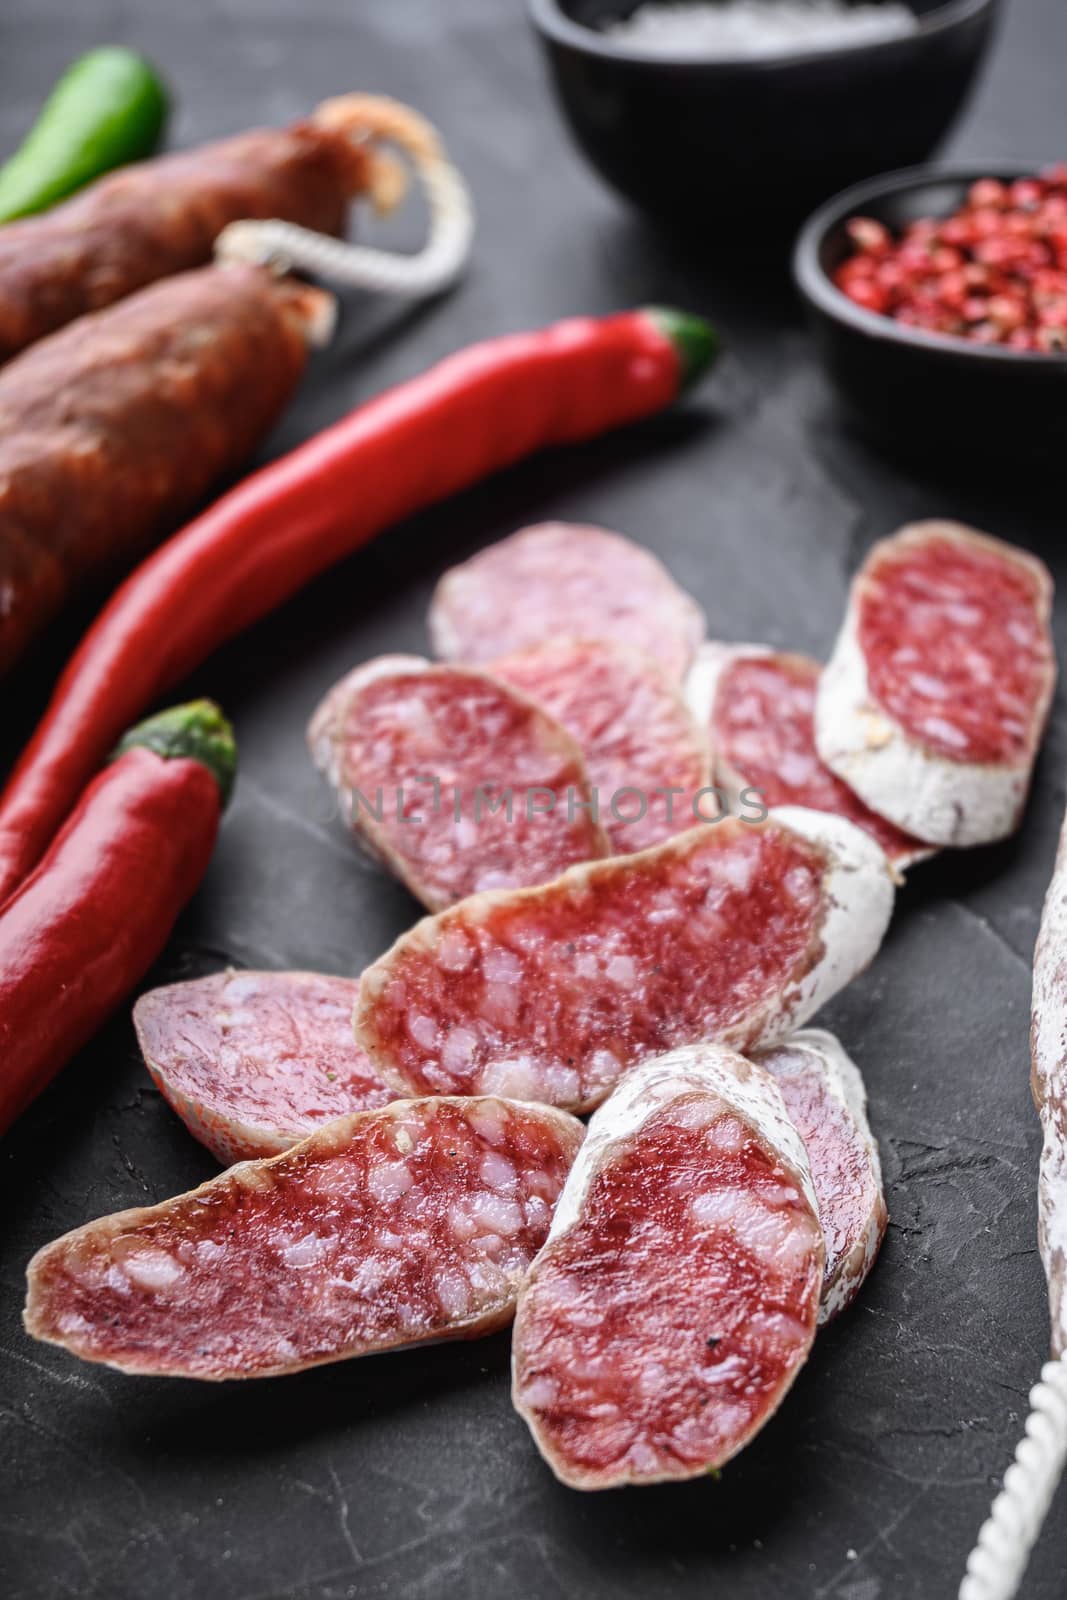 Set of various spanish dry cured salami sausages slices and whole cuts on balck background.